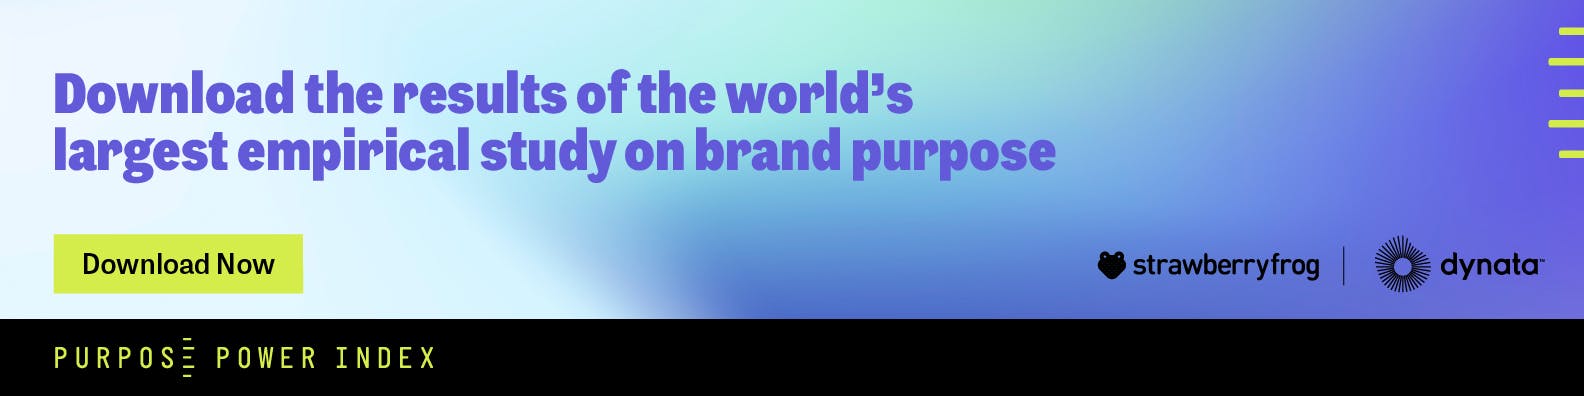 Download results of the word's largest study on brand purpose - Purpose Power Index 2022